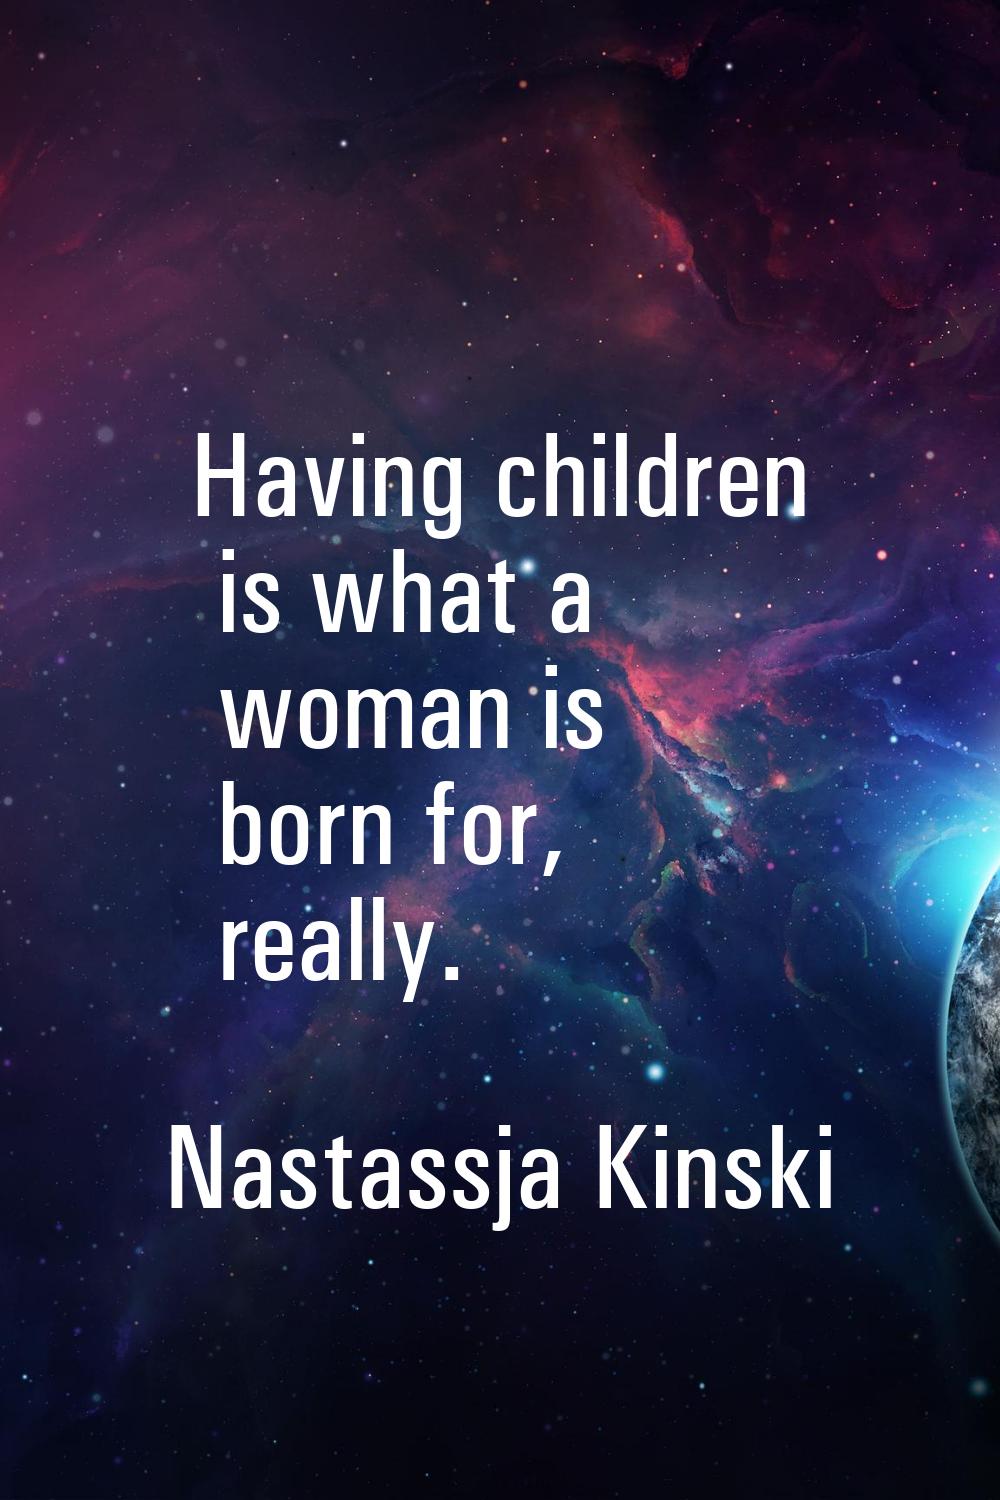 Having children is what a woman is born for, really.